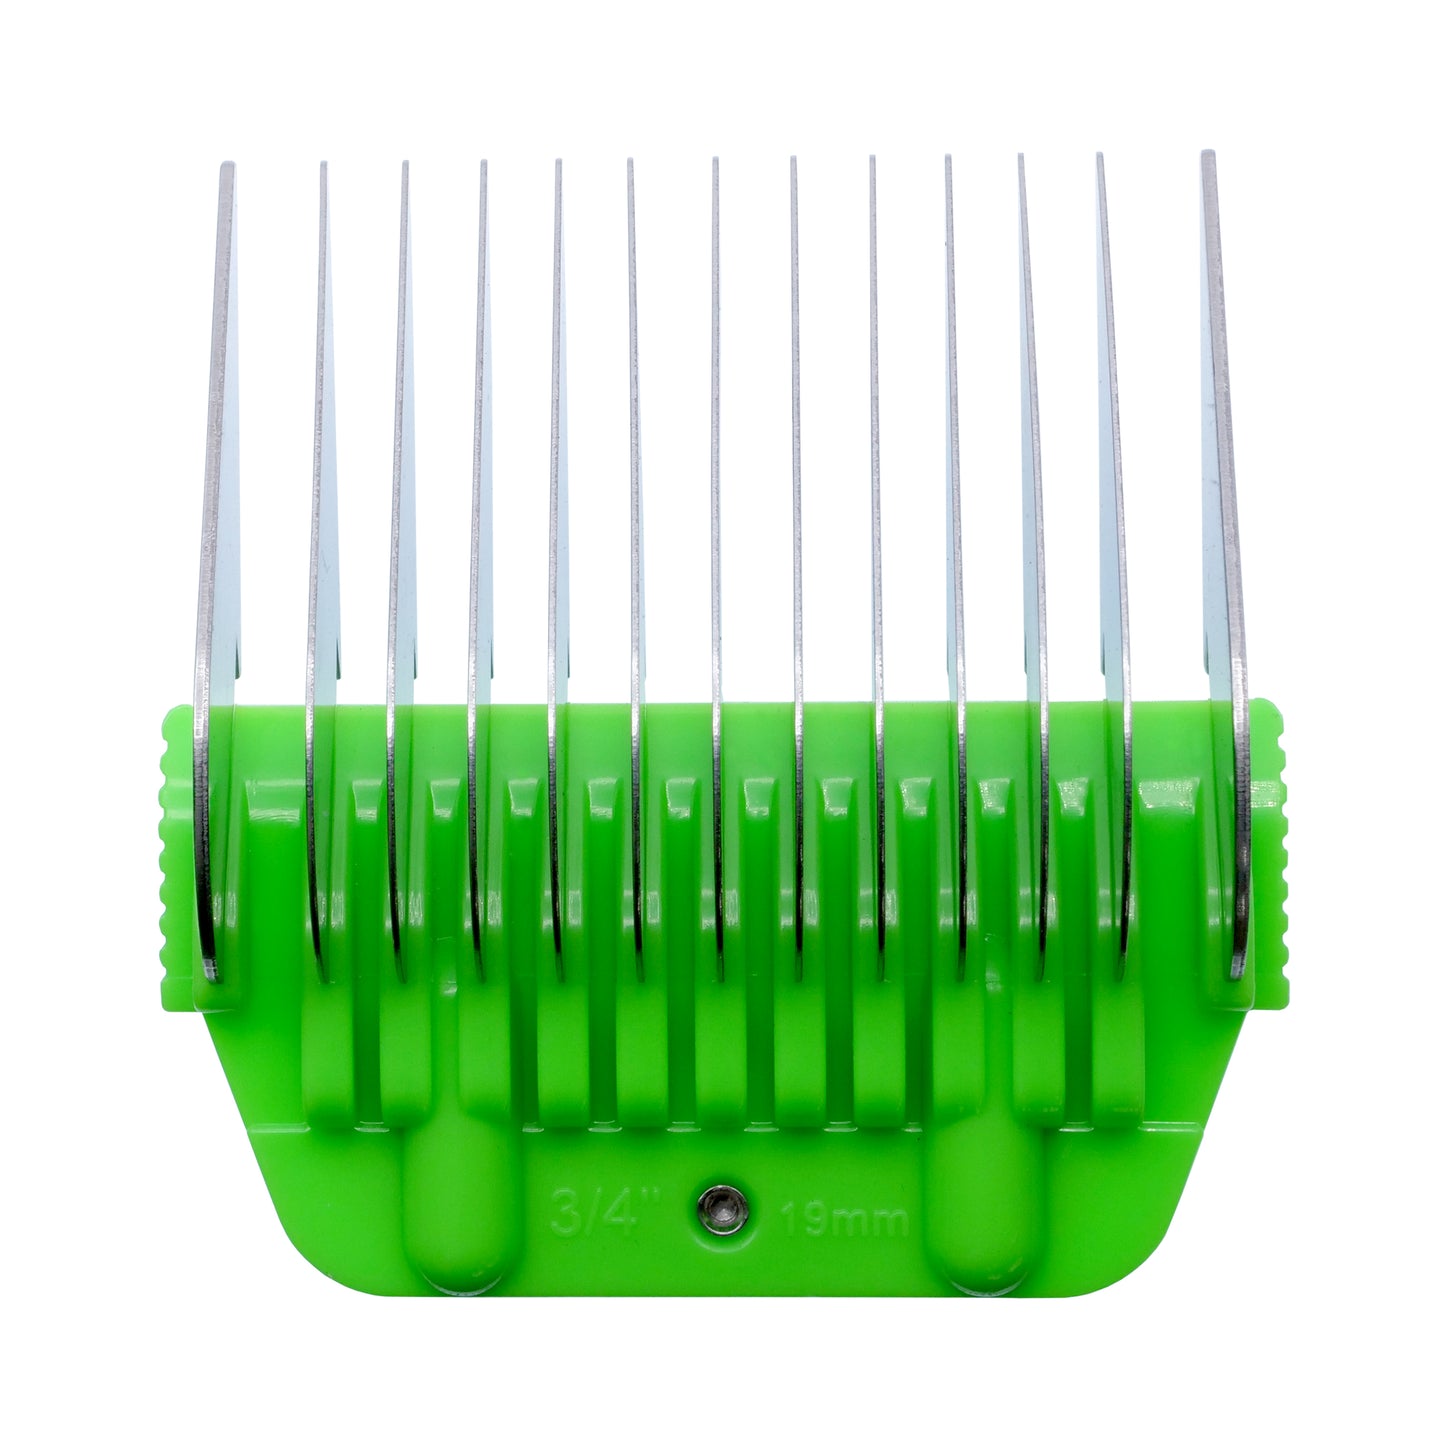 The Artero Wide Snap-On Metal Comb 19mm - 3/4" is designed for use with the Artero A5 wide clipper blade and offers a smooth, even finish. This comb is also compatible with Andis, Moser, Heiniger, Oster, and Aesculap Fav5 and Fav5 CL blades. Features: Cutting height: 3/4" Metal Construction Fits A5 Clippers.